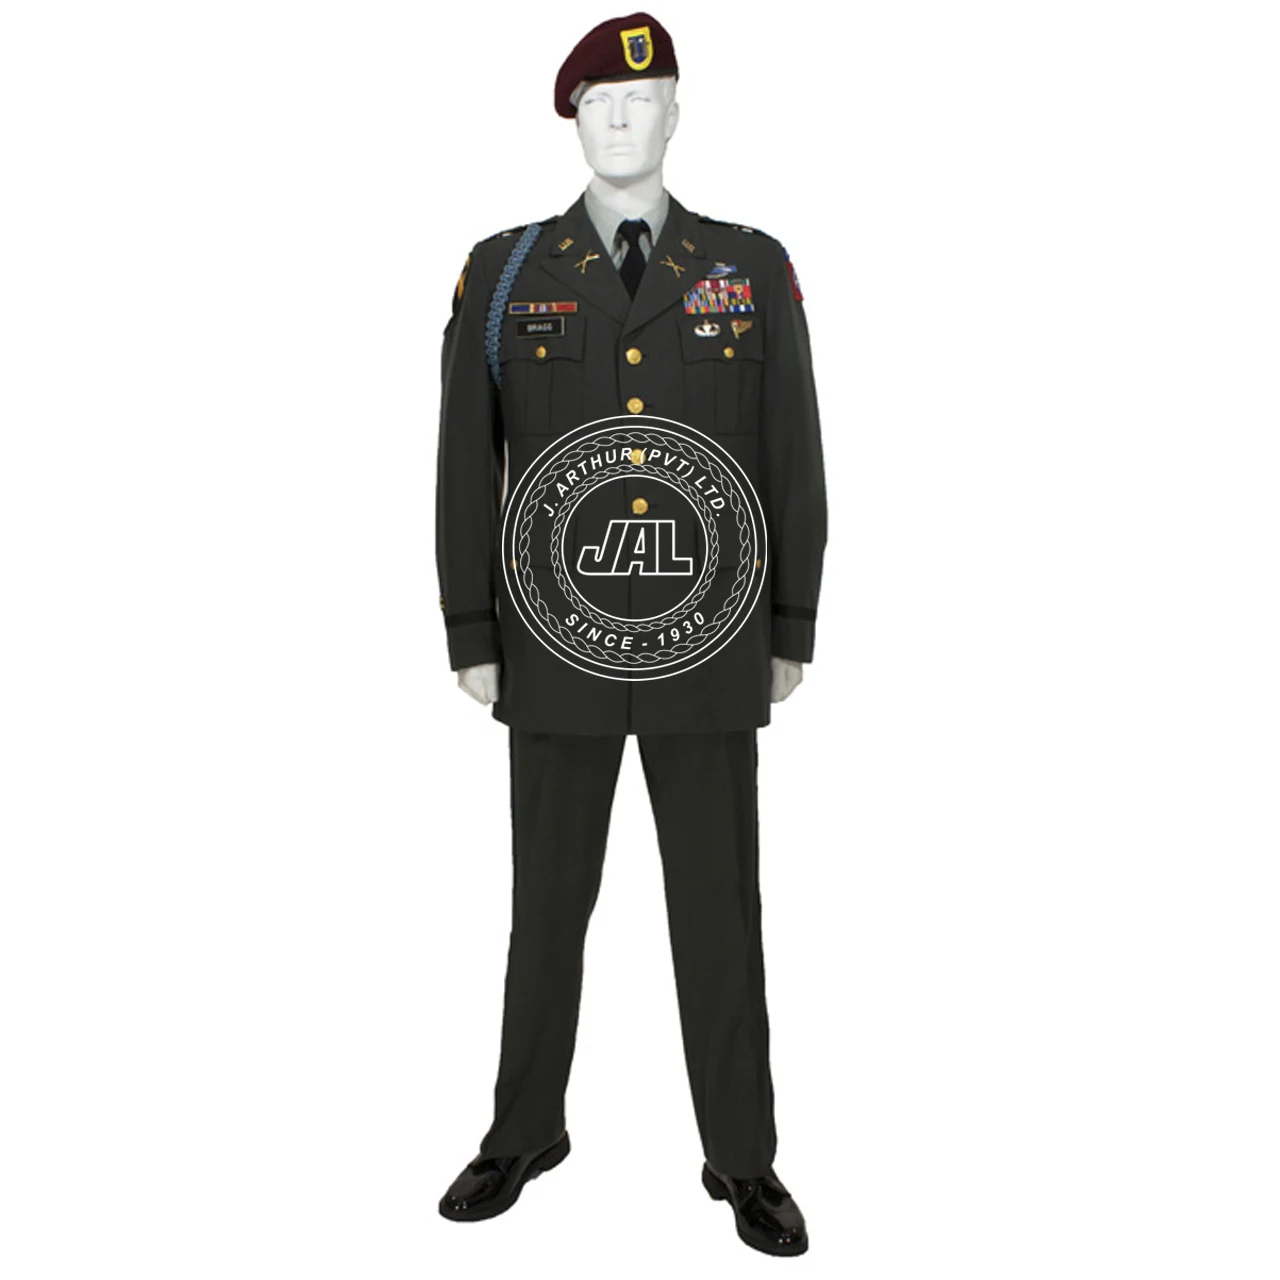 Us Army Green Service Uniform Officer I Us Army Dress Uniform For Men I Us Army General Uniform Buy Officer S Green Uniform I Us Army Class A Uniform I Us Army [ 1280 x 1280 Pixel ]